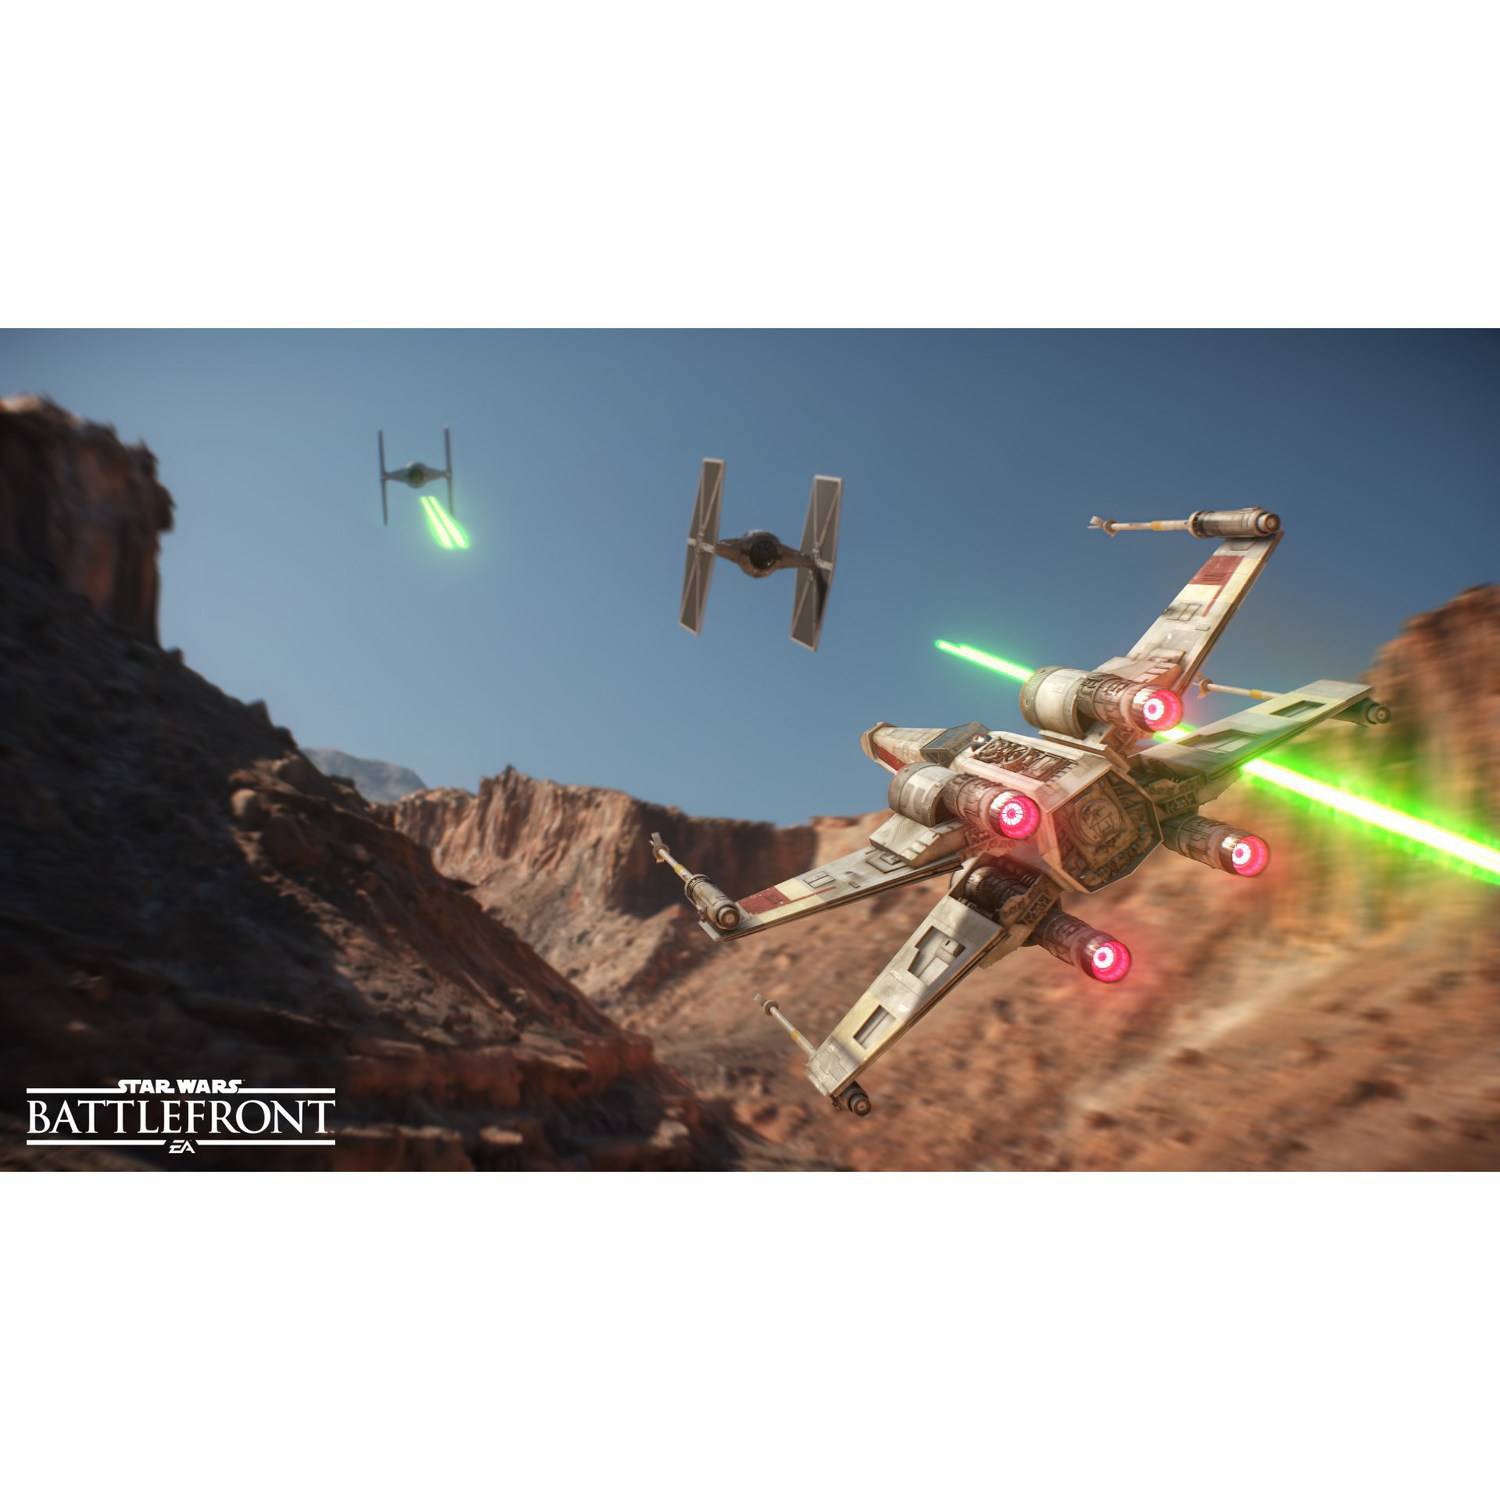 Electronic Arts Star Wars Battlefront for Xbox One - image 3 of 5